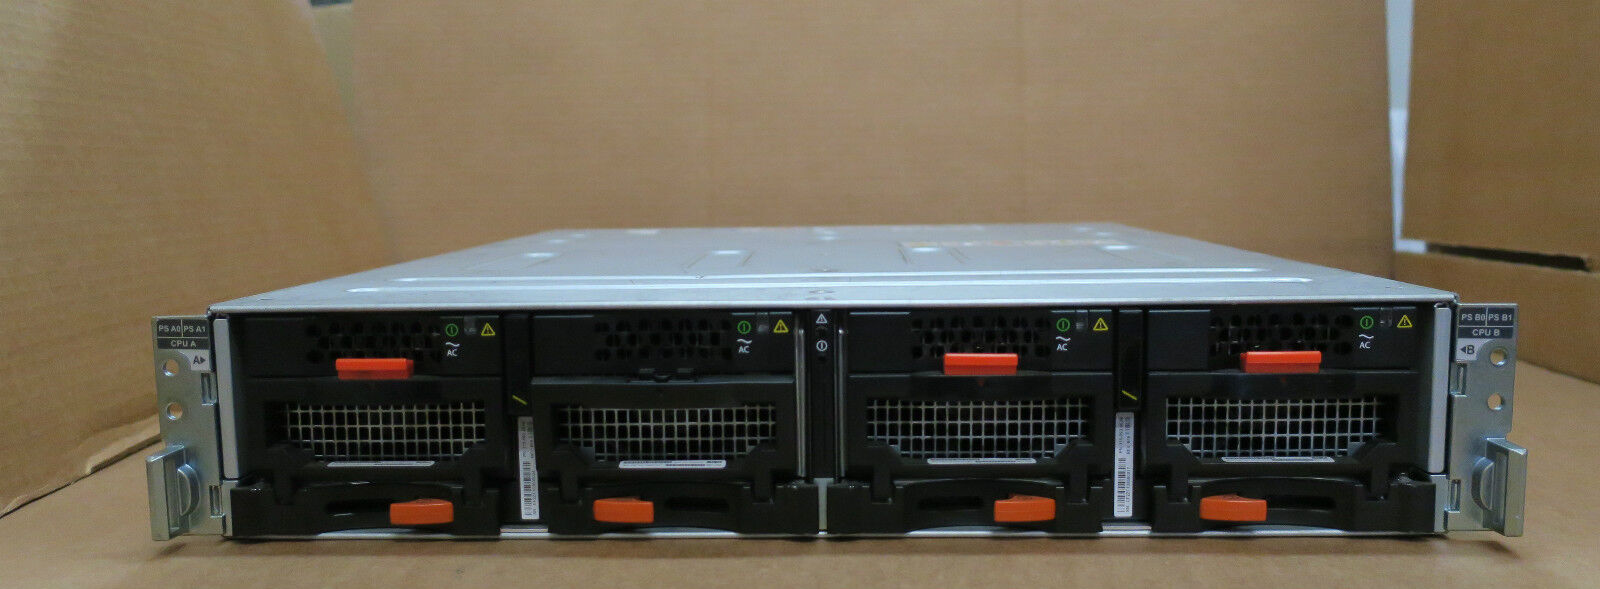 EMC TRPE - Expansion Array With 2 x Controllers DF2FY 4 x PSU Rackmount